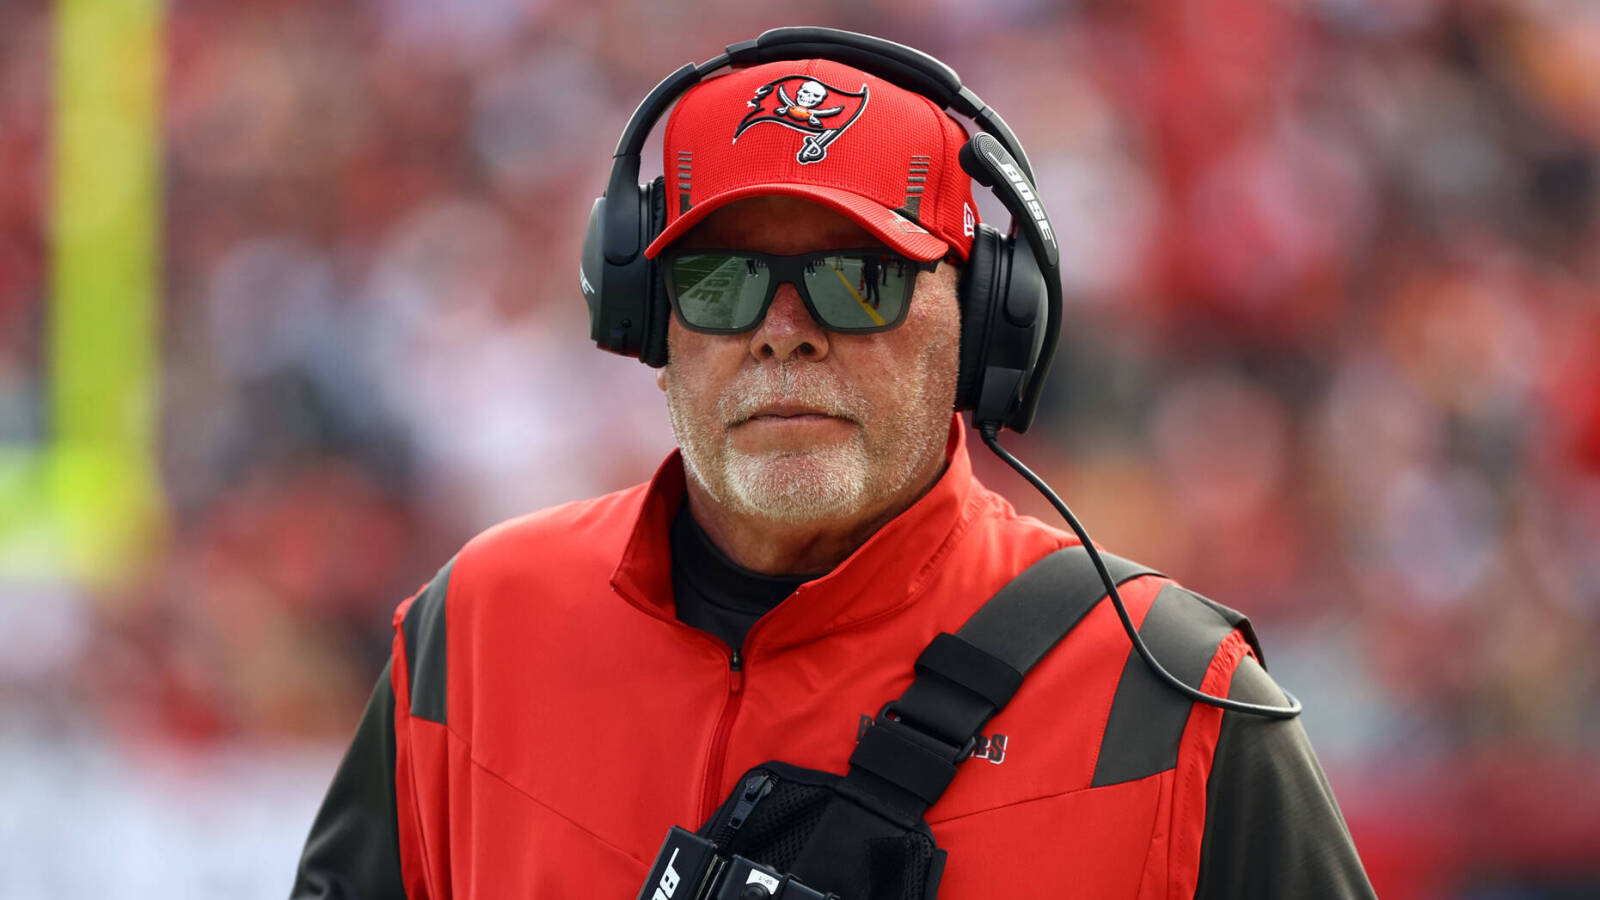 Bruce Arians expands on stepping down as Buccaneers head coach